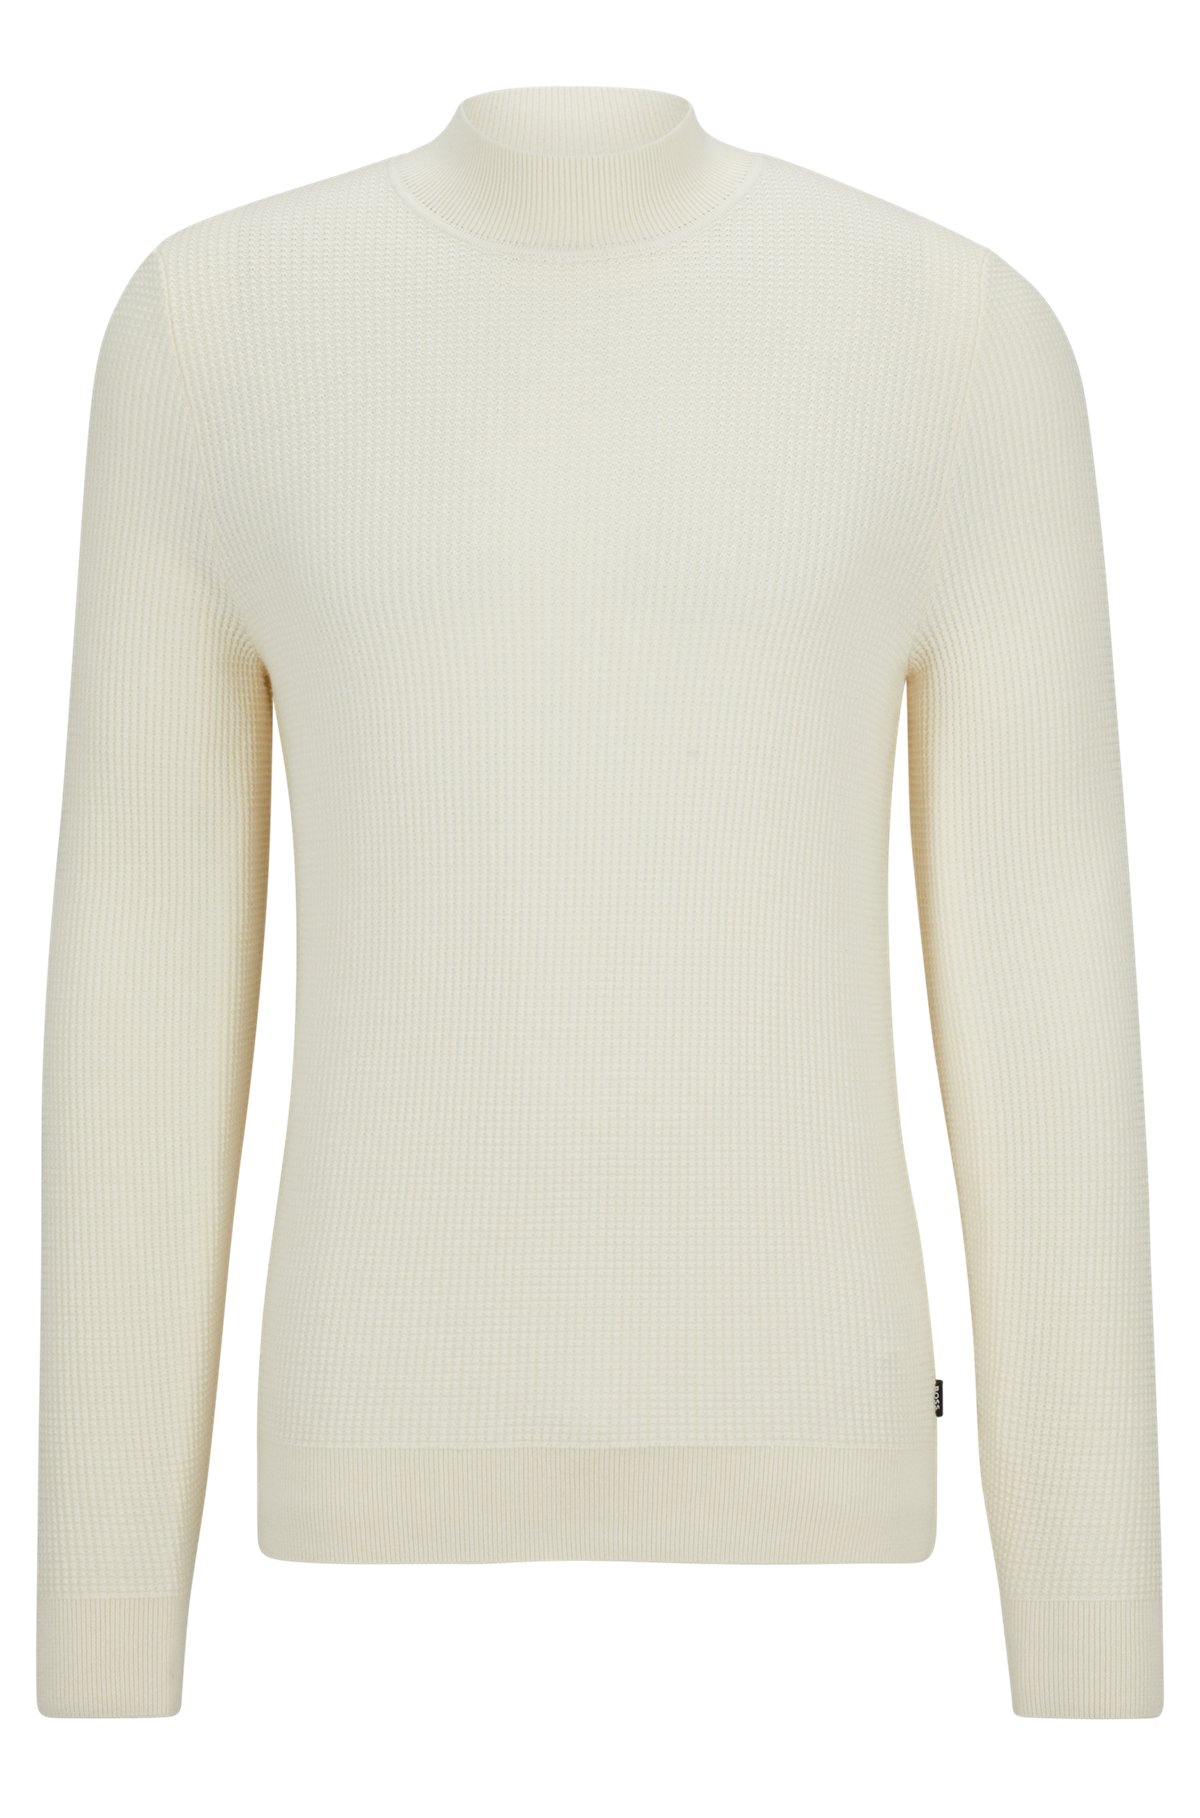 BOSS - Mock-neck sweater in virgin wool and cotton